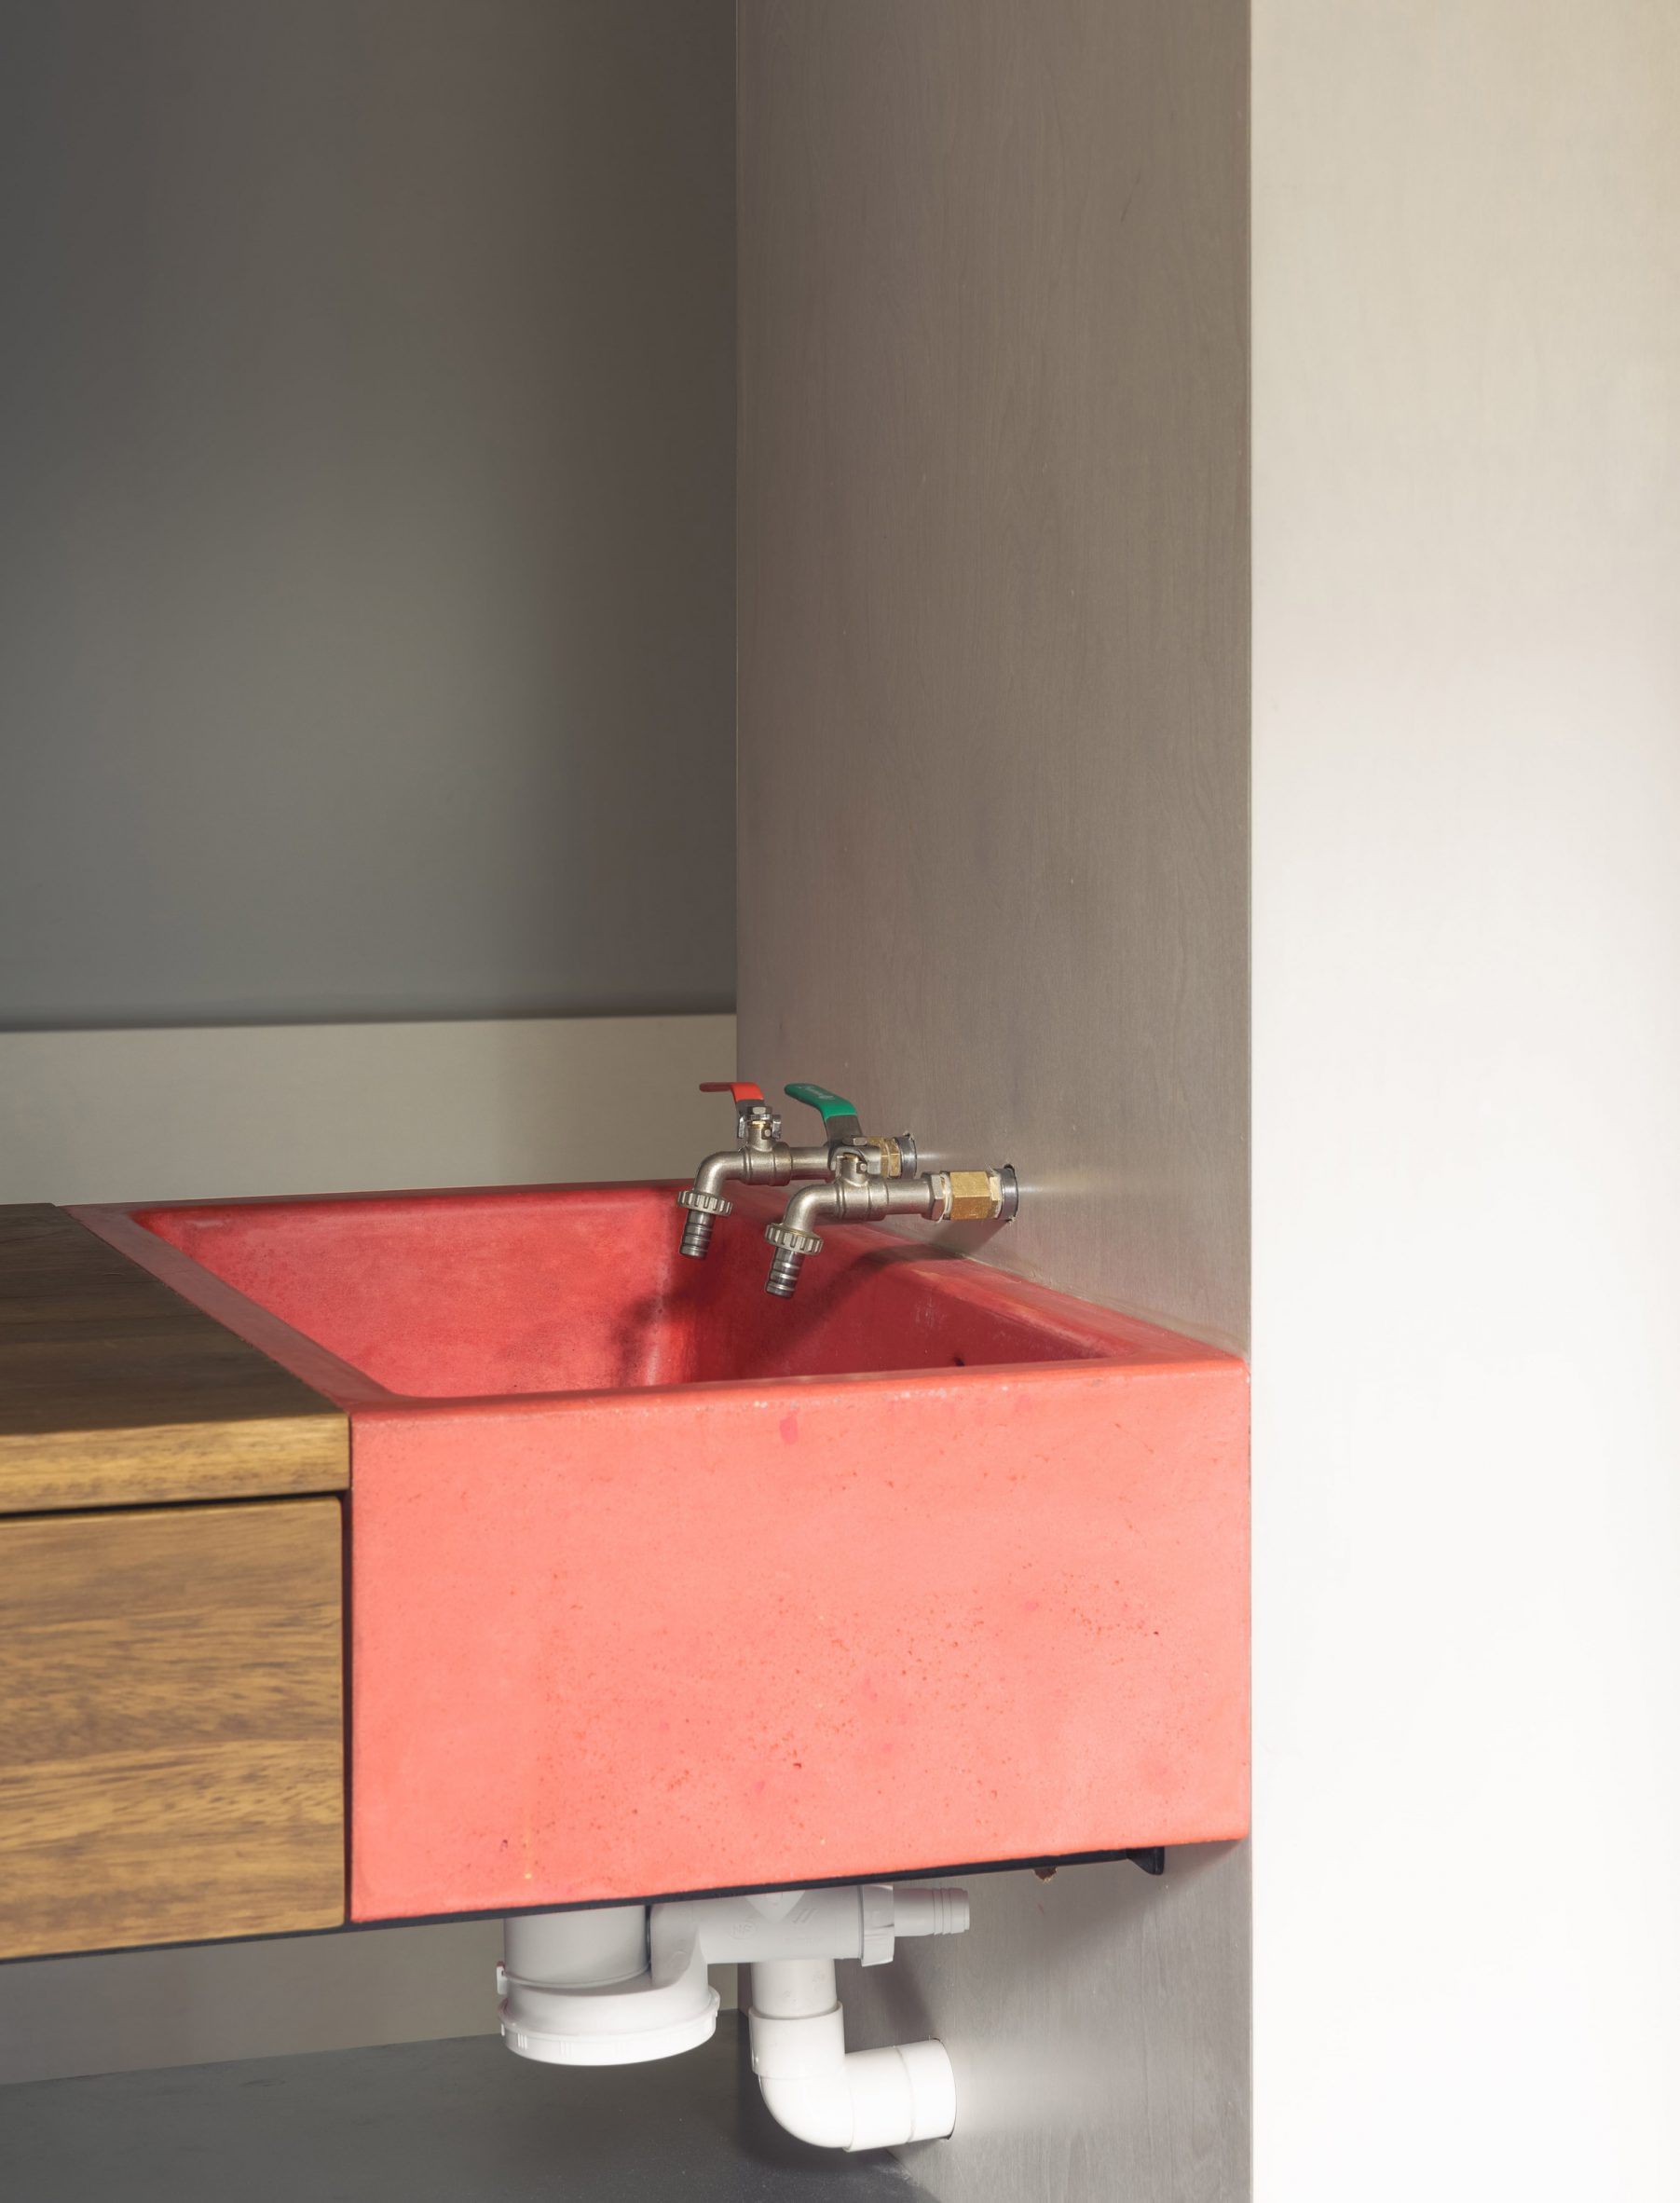 Oversized red cast-concrete sink in kitchen of micro apartment